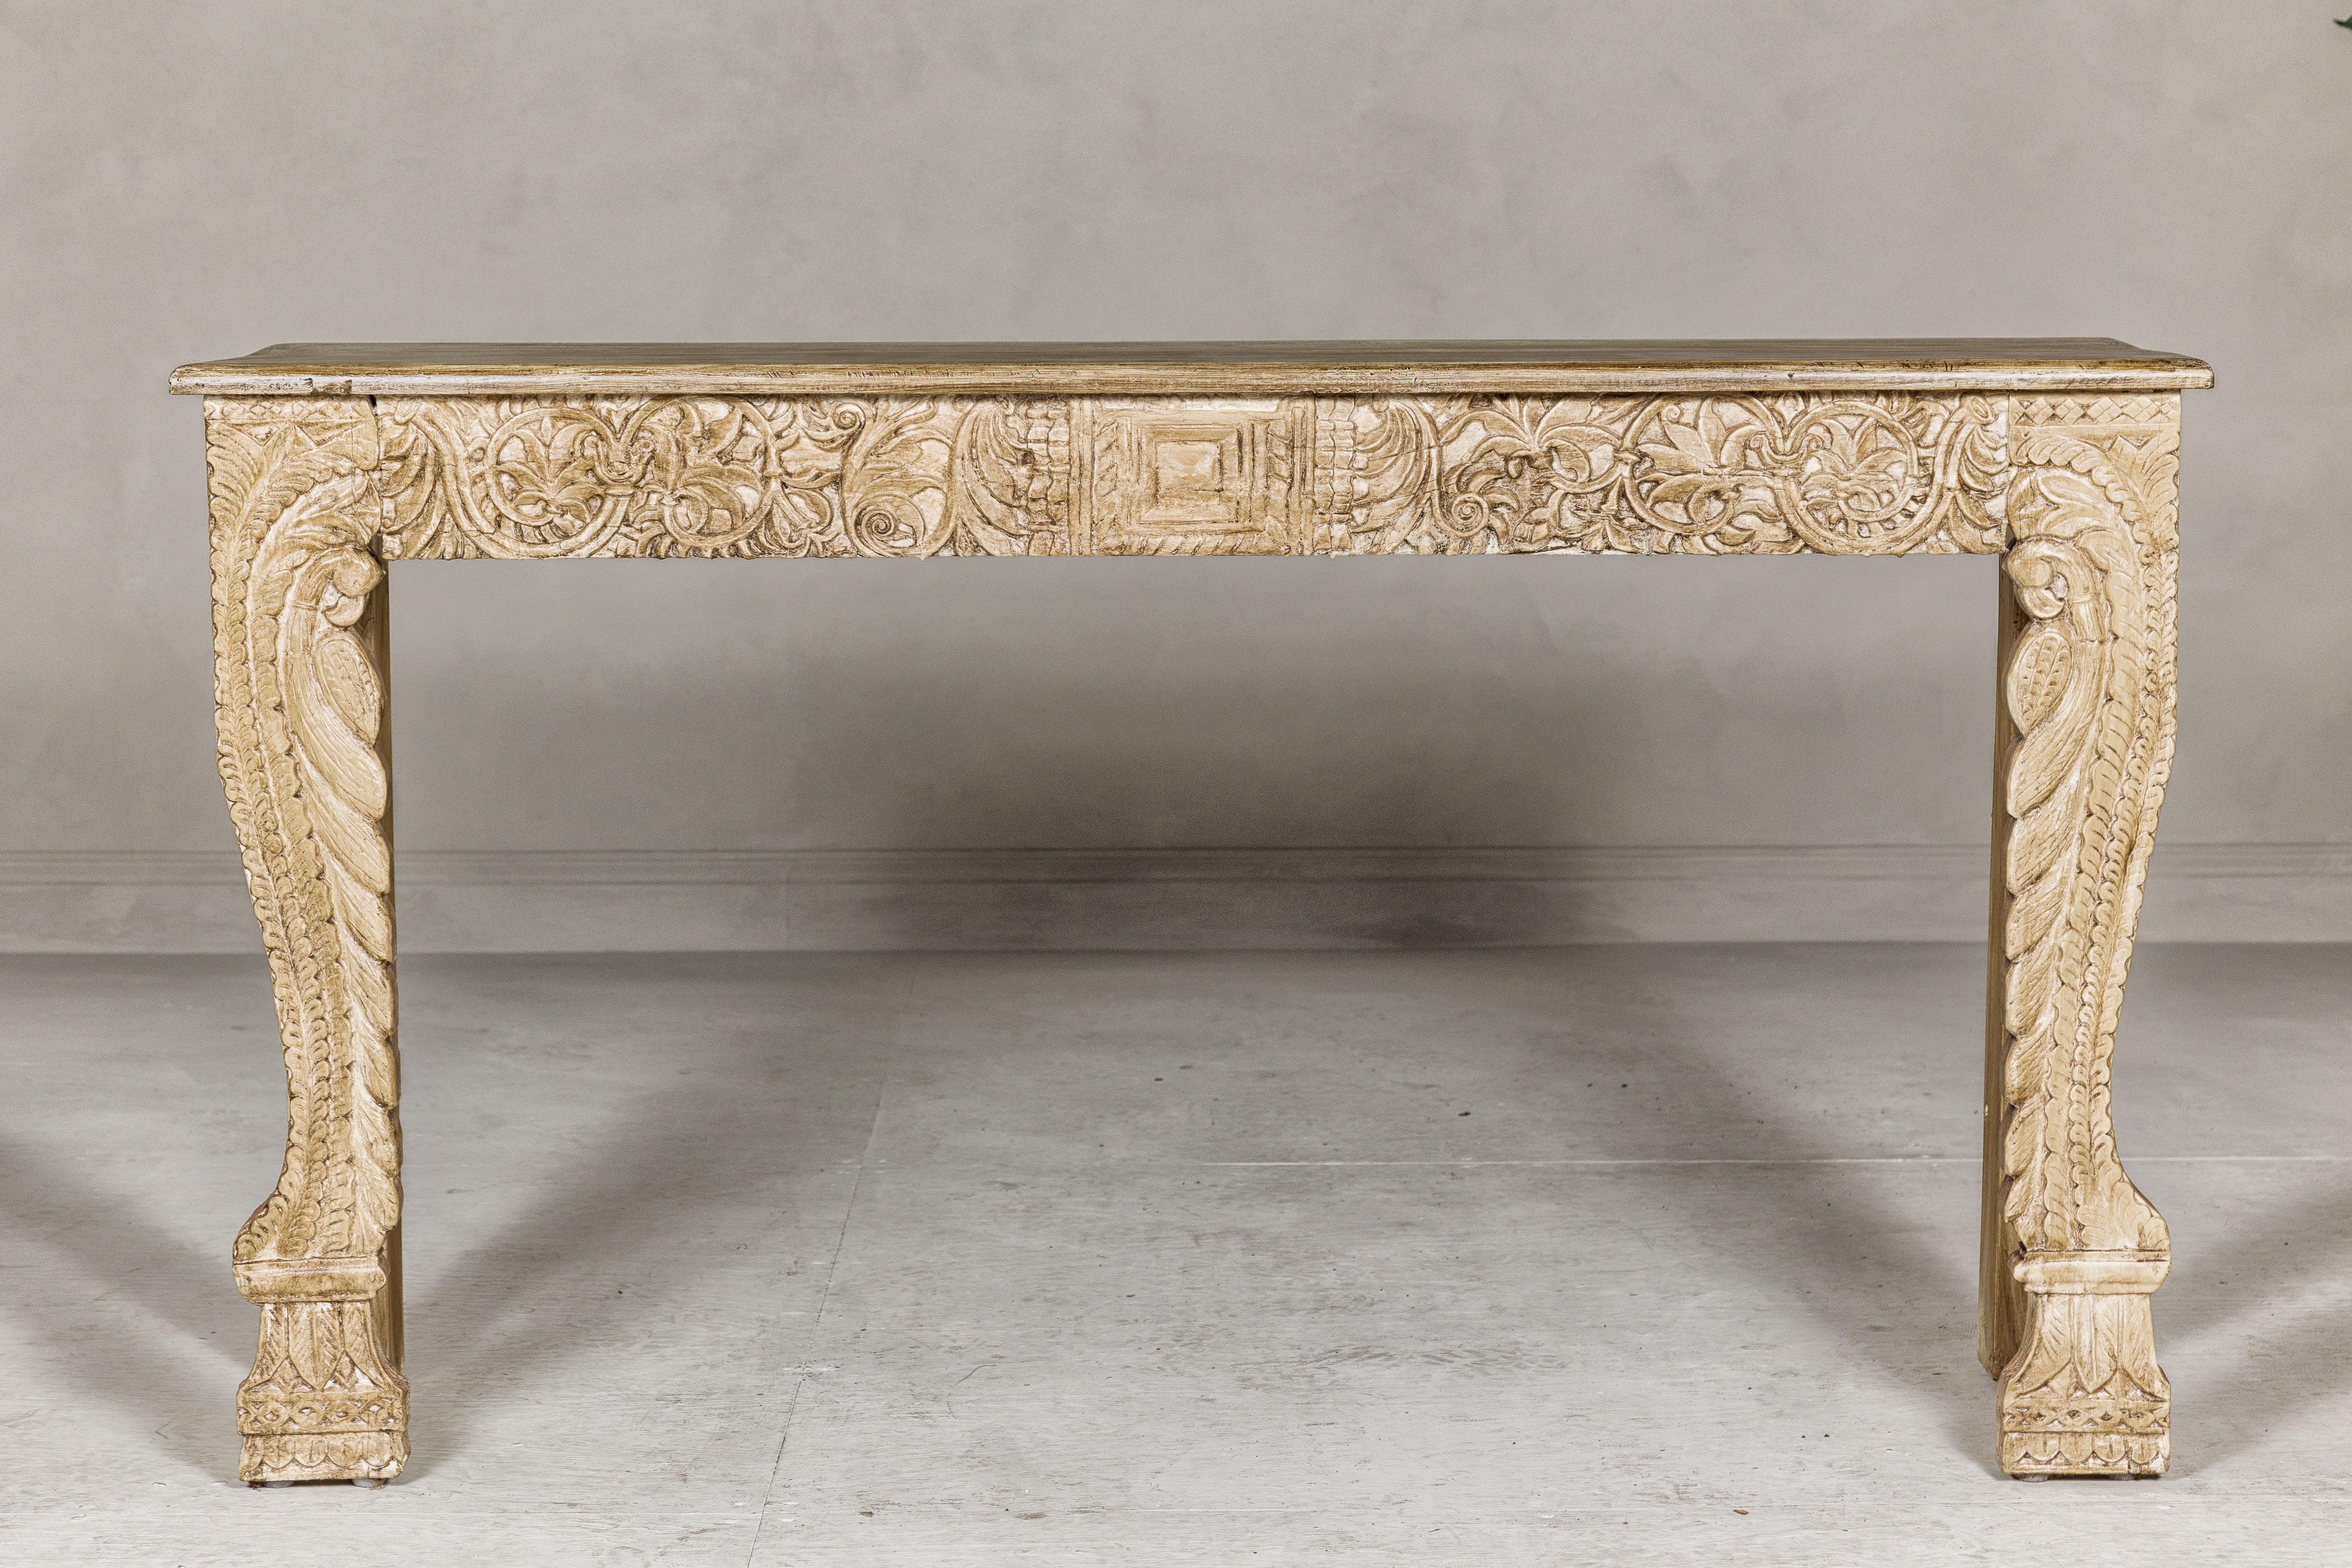 Contemporary Mughal Style Painted Console Table with Foliage Carved Apron and Legs For Sale